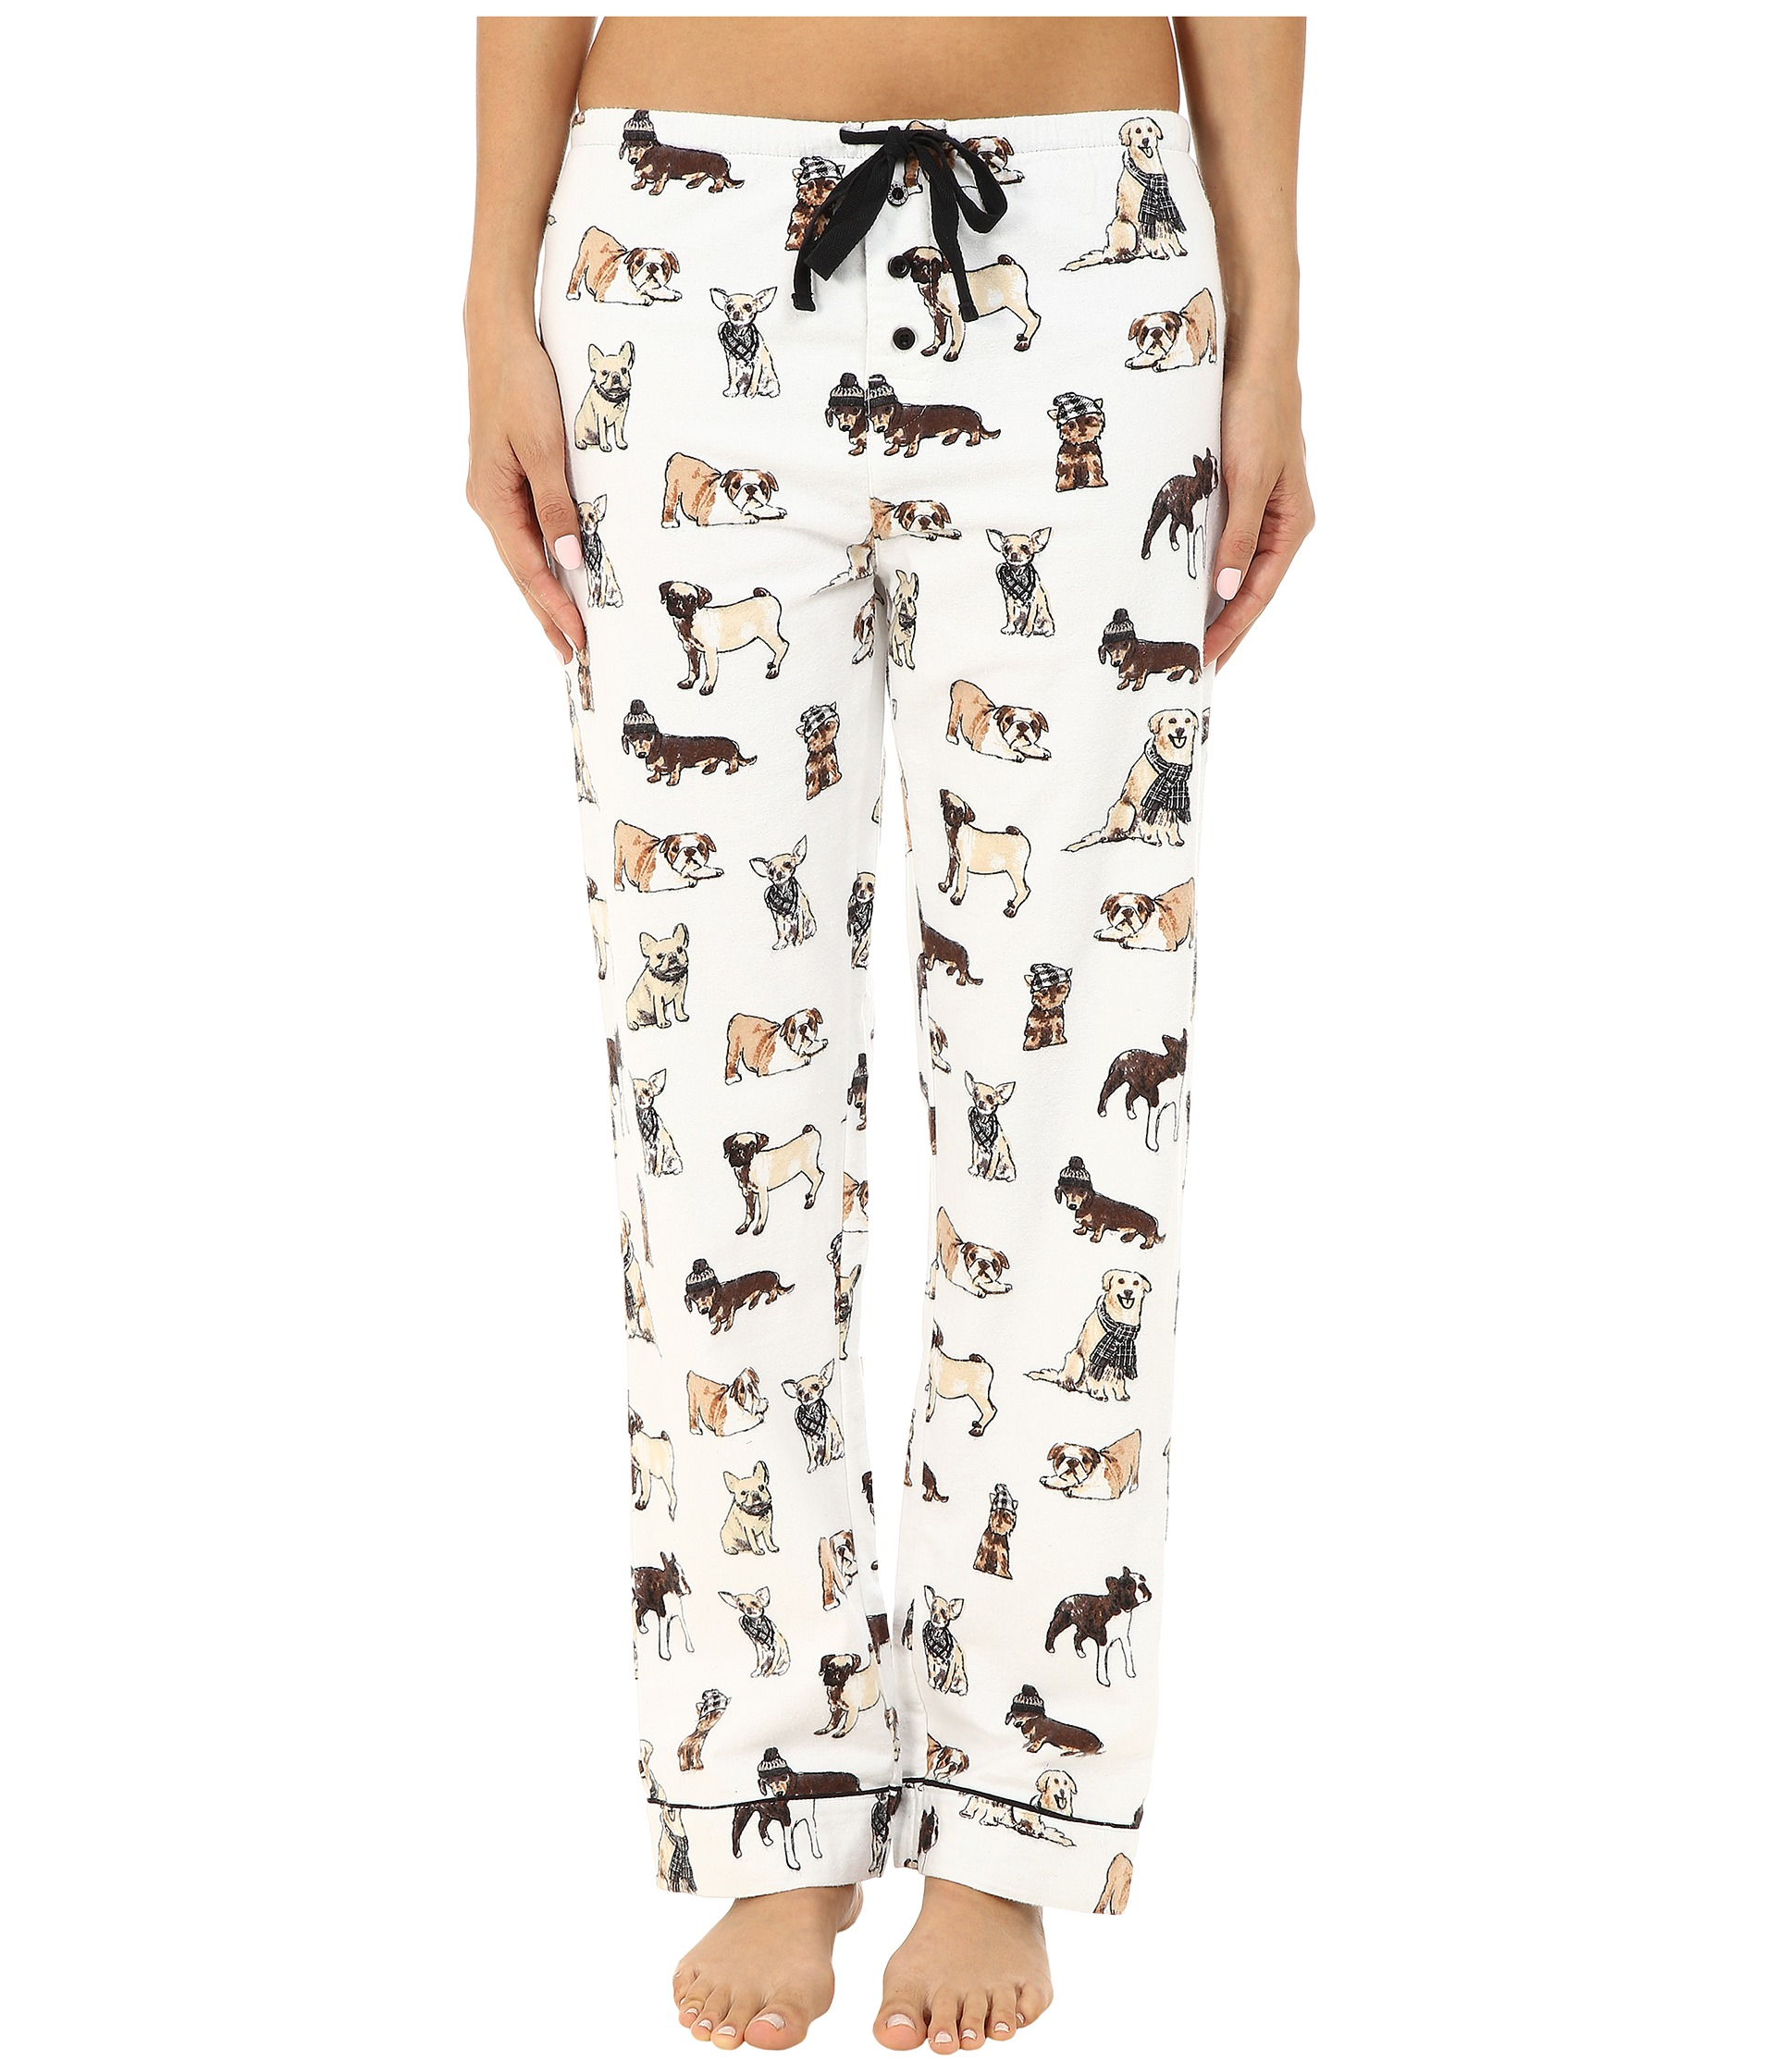 Lyst - Pj Salvage Fall Into Flannel Dog Print Pajama Set in White